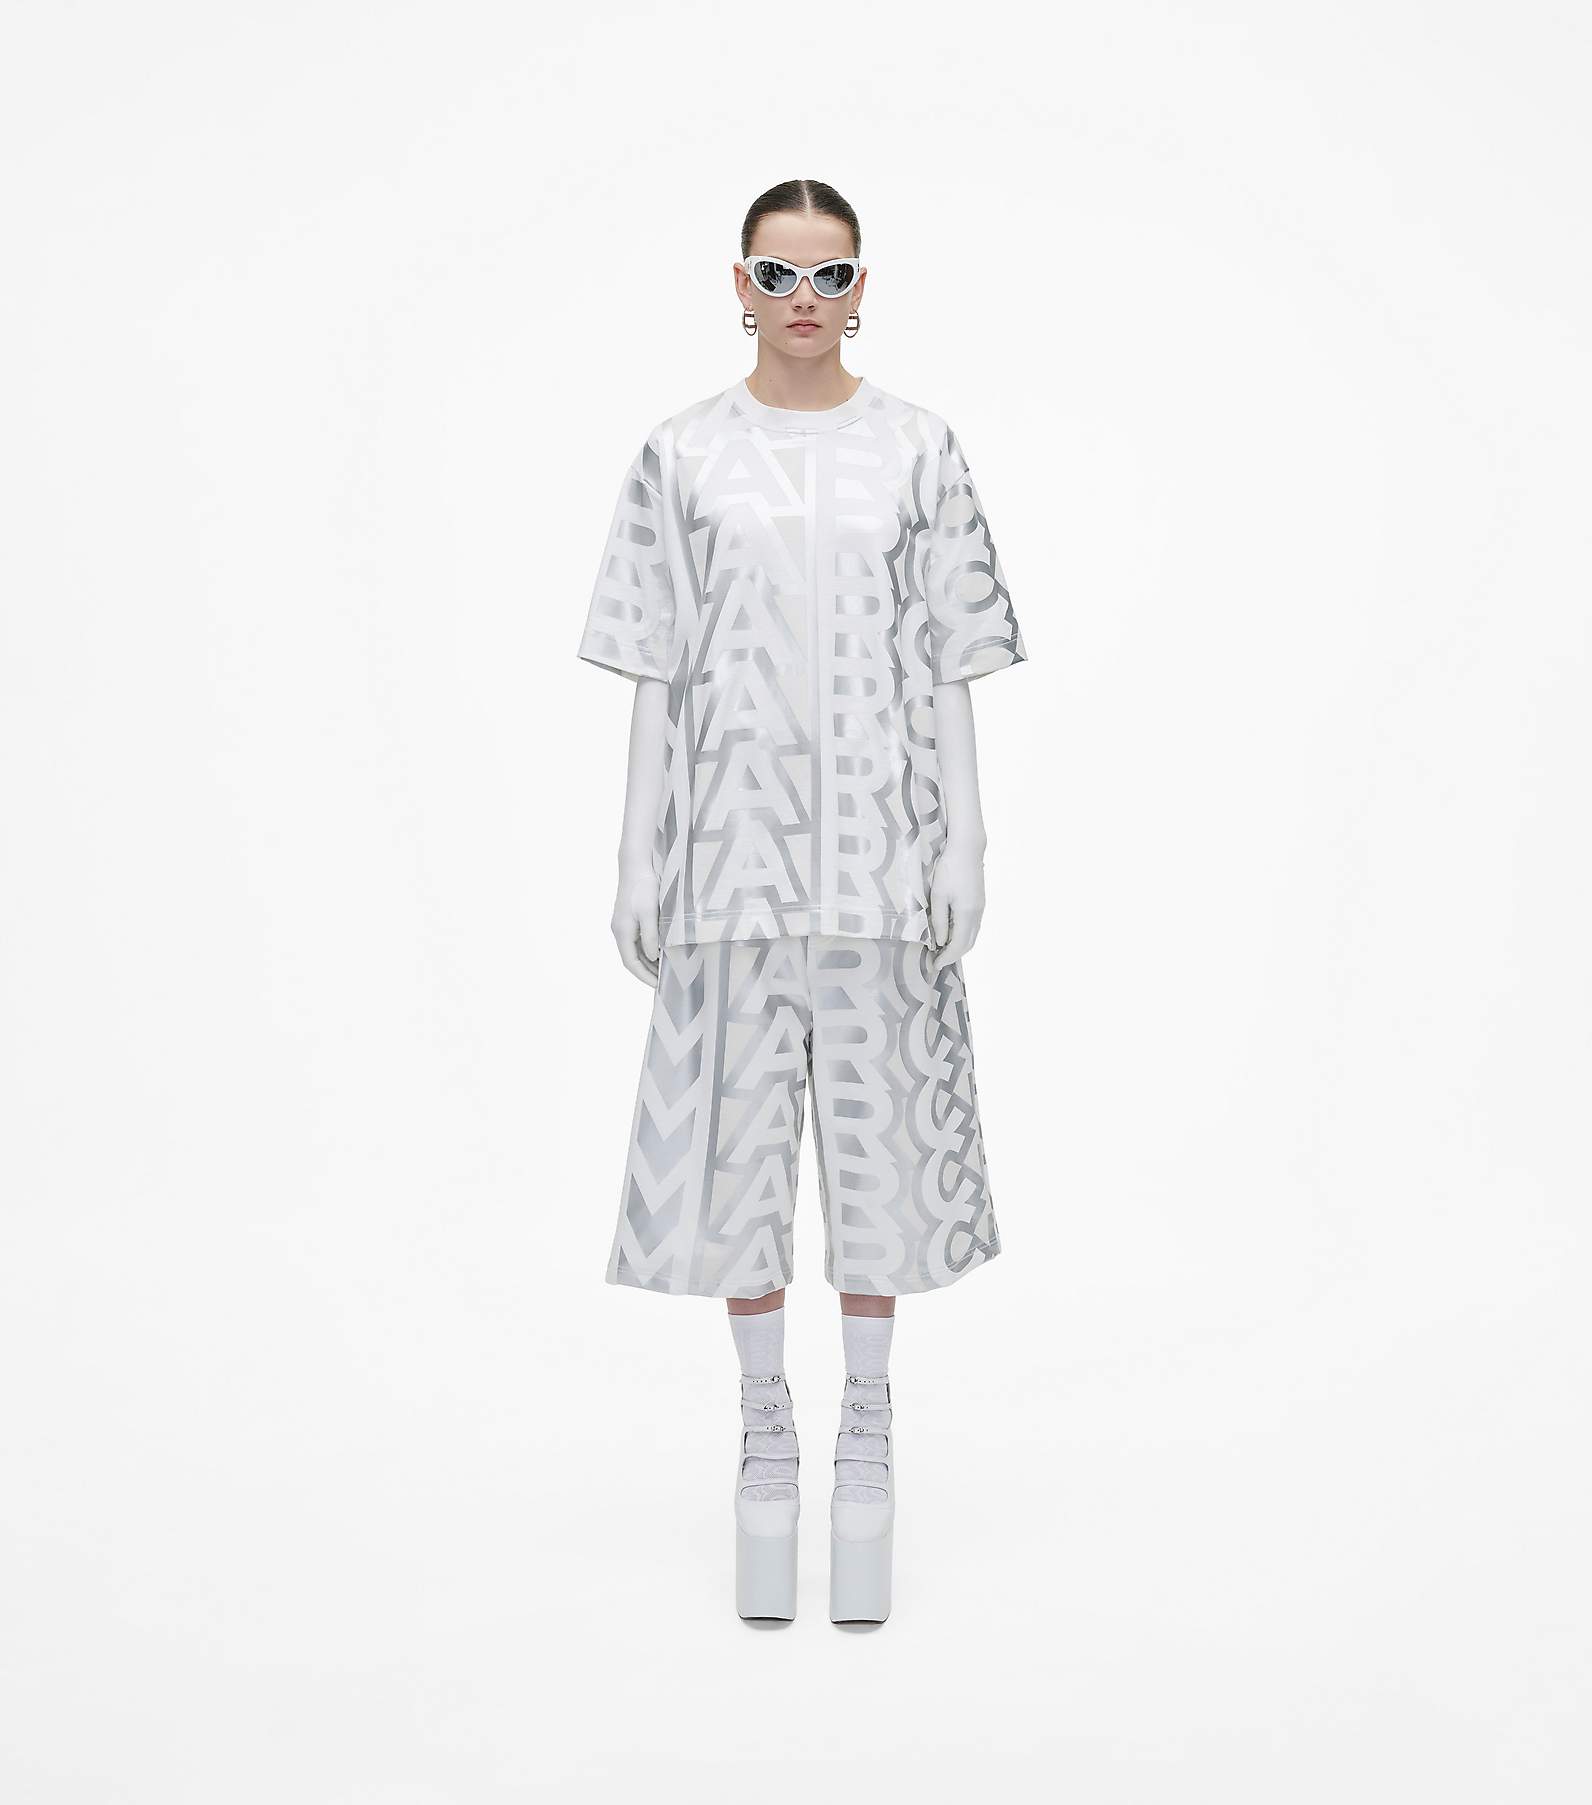 Marc Jacobs The Monogram Big Shirt in White, Size XL